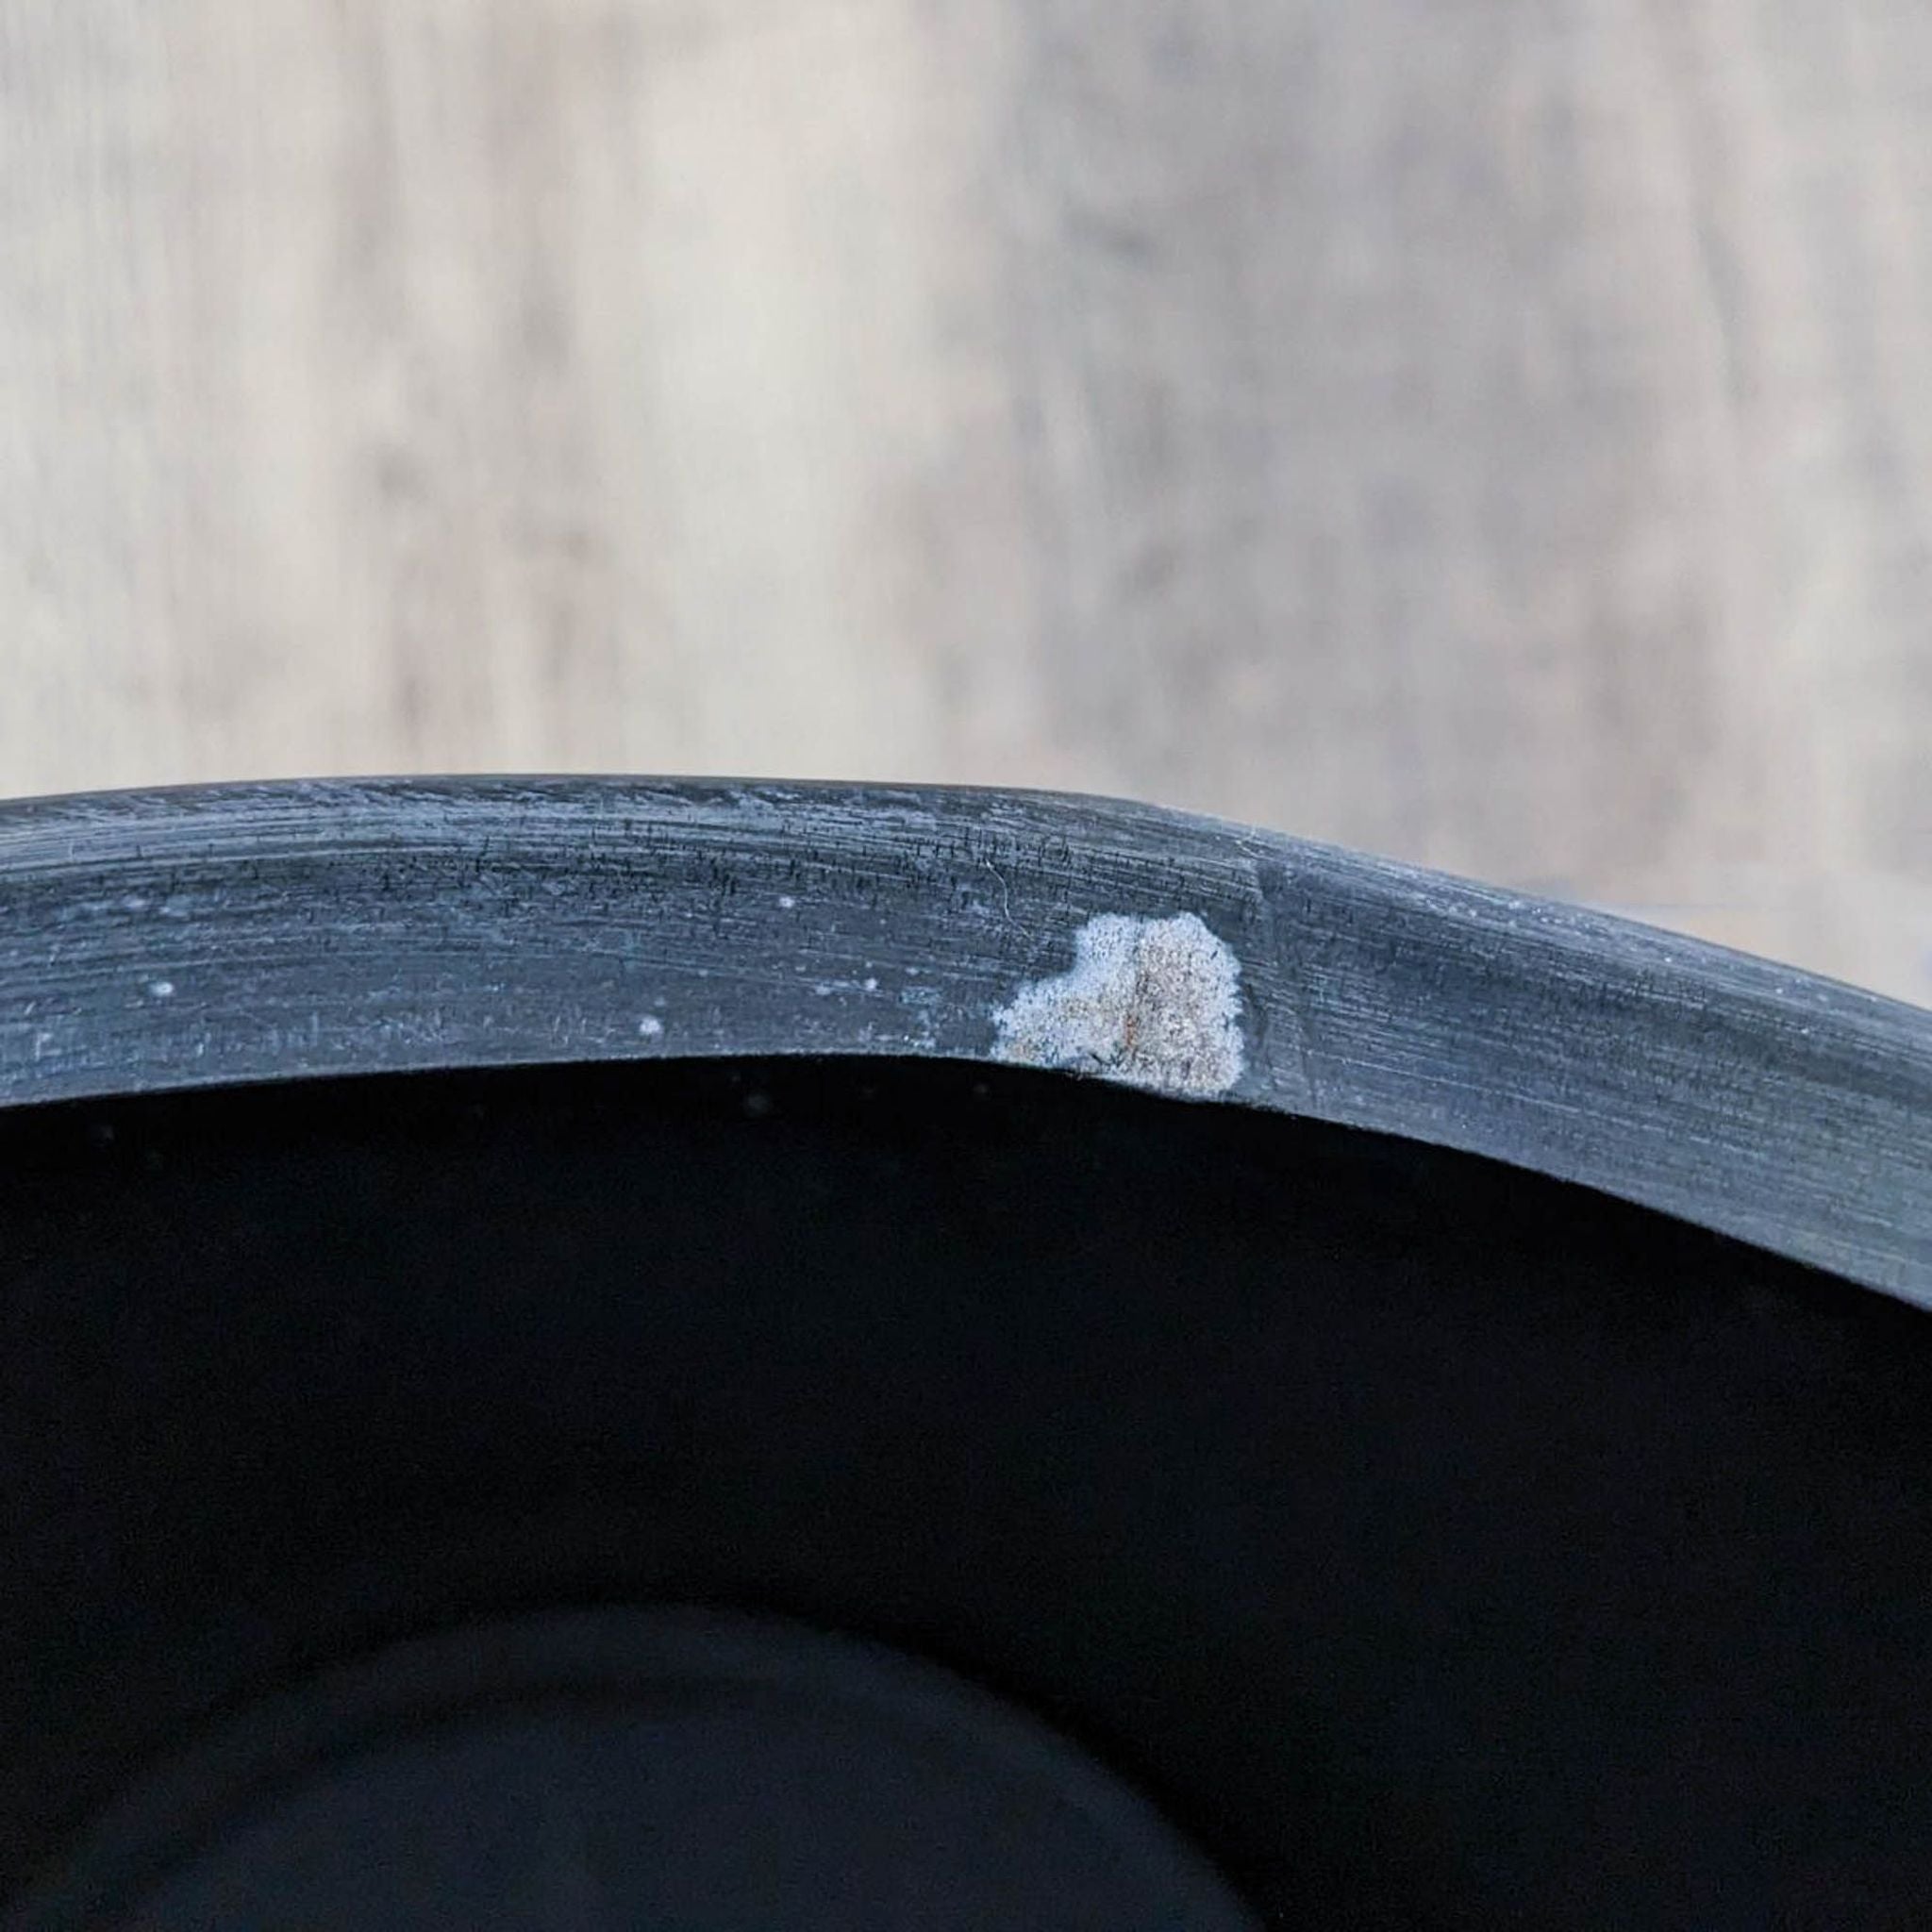 Close-up of a Reperch drum table edge showing wear and chipping paint.